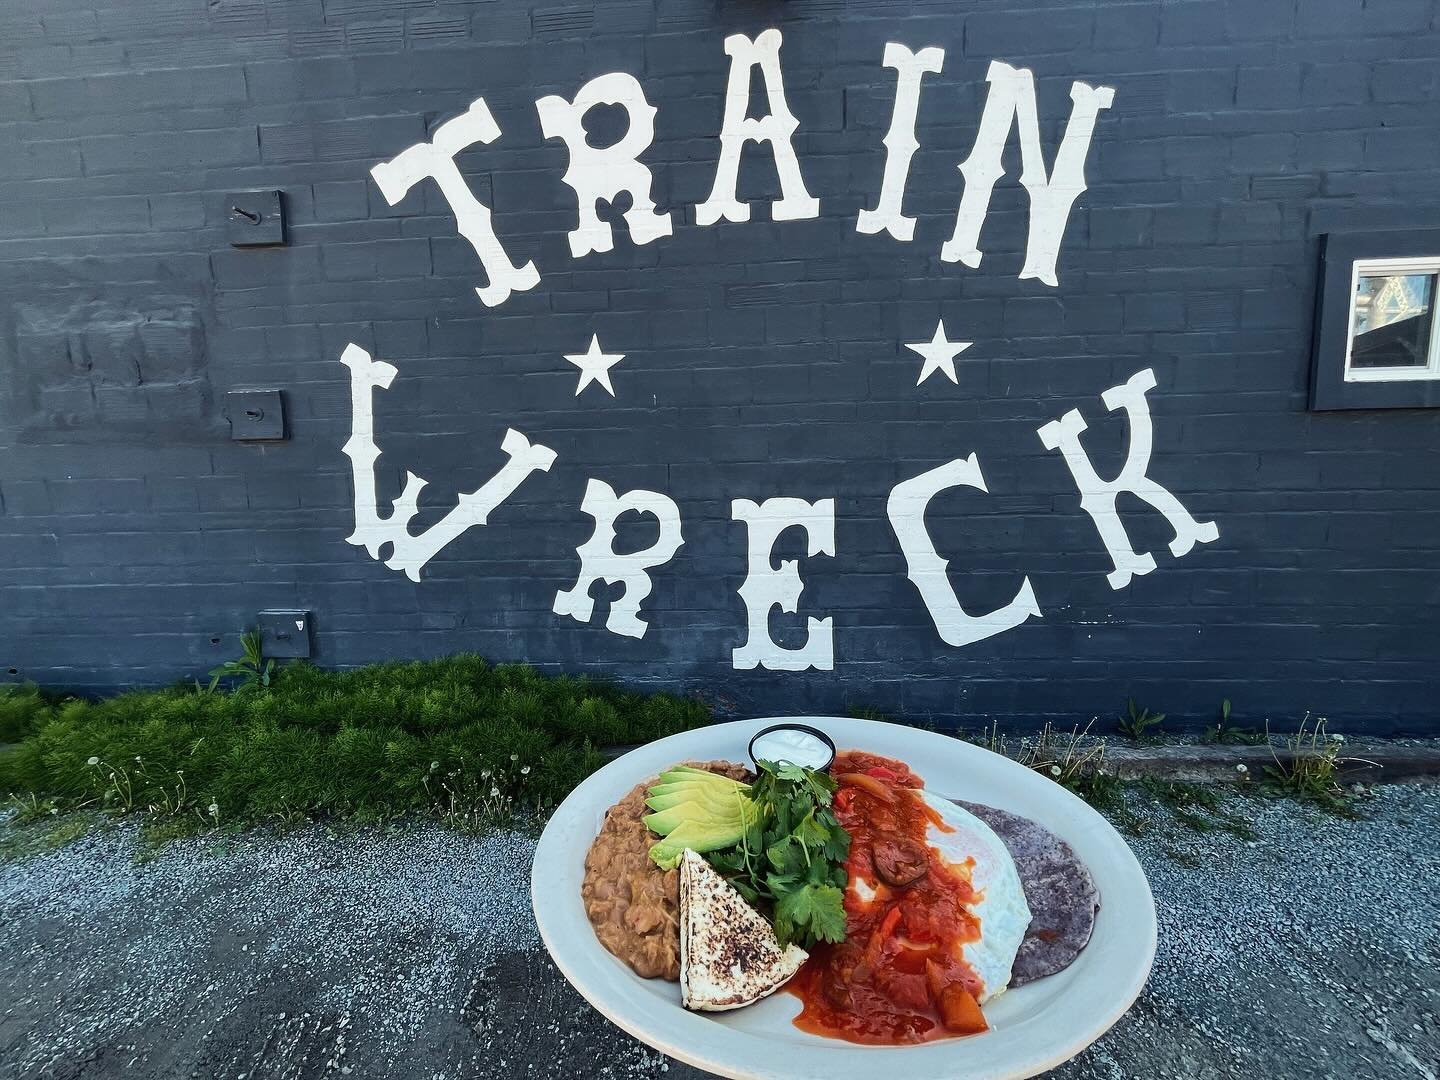 Are you ready for Cinco de Mayo?! 🇲🇽 Train Wreck is! Specials are available all week long, come in and celebrate with us.

𝗙𝗢𝗢𝗗 𝗦𝗣𝗘𝗖𝗜𝗔𝗟𝗦:

◾️ Huevos Rancheros&mdash;El Molino&rsquo;s blue corn tortillas topped with two eggs &amp; salsa 